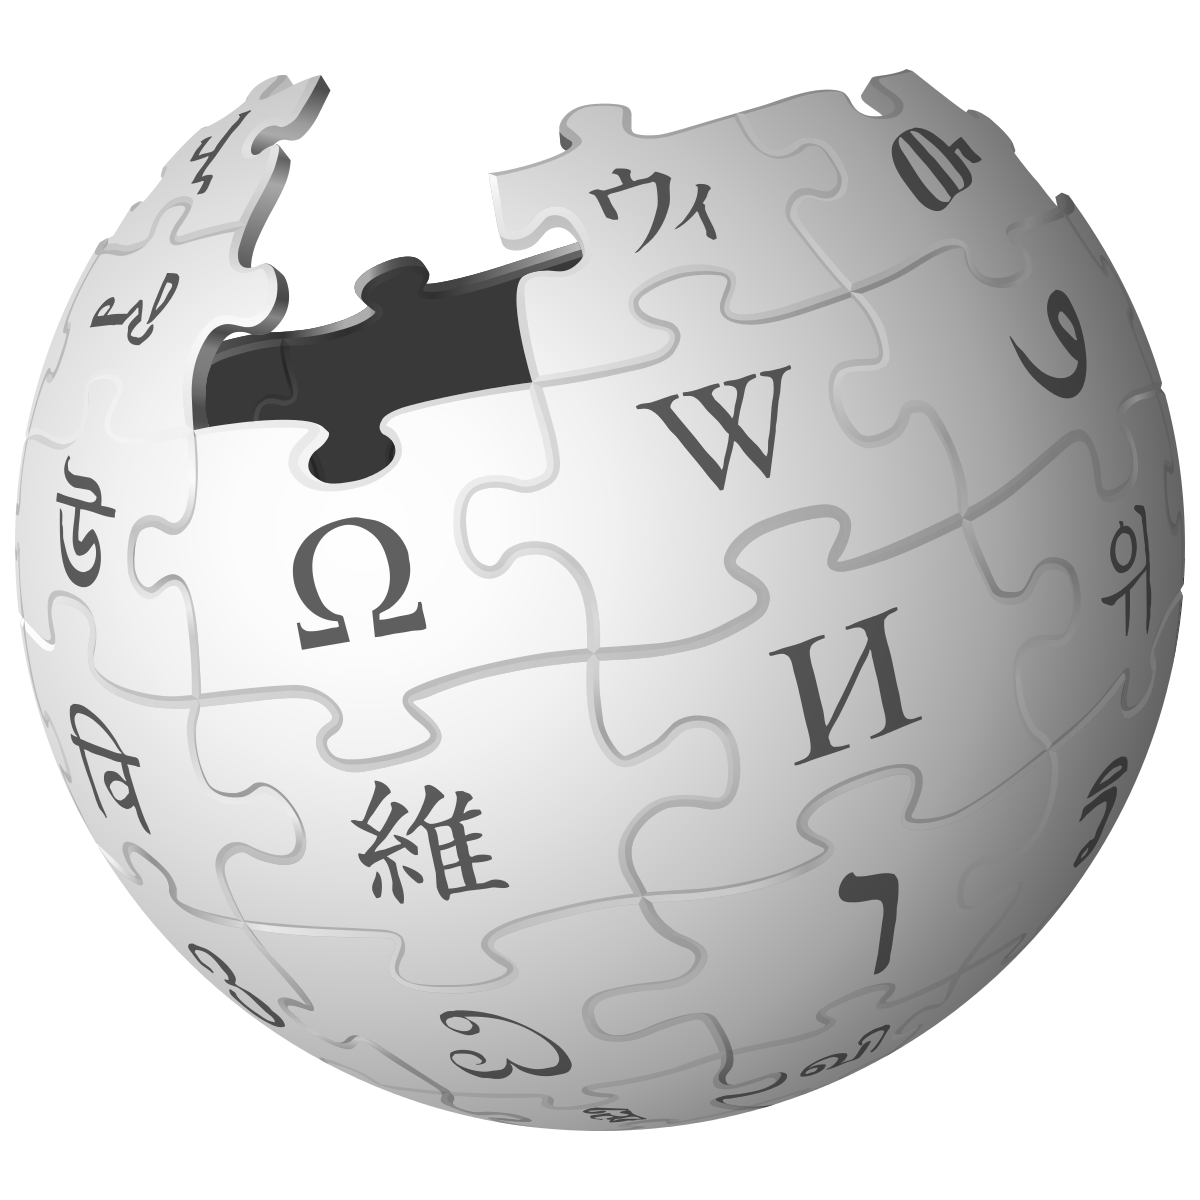 Wiki Game: How To Play The Fun Game Of Wikipedia